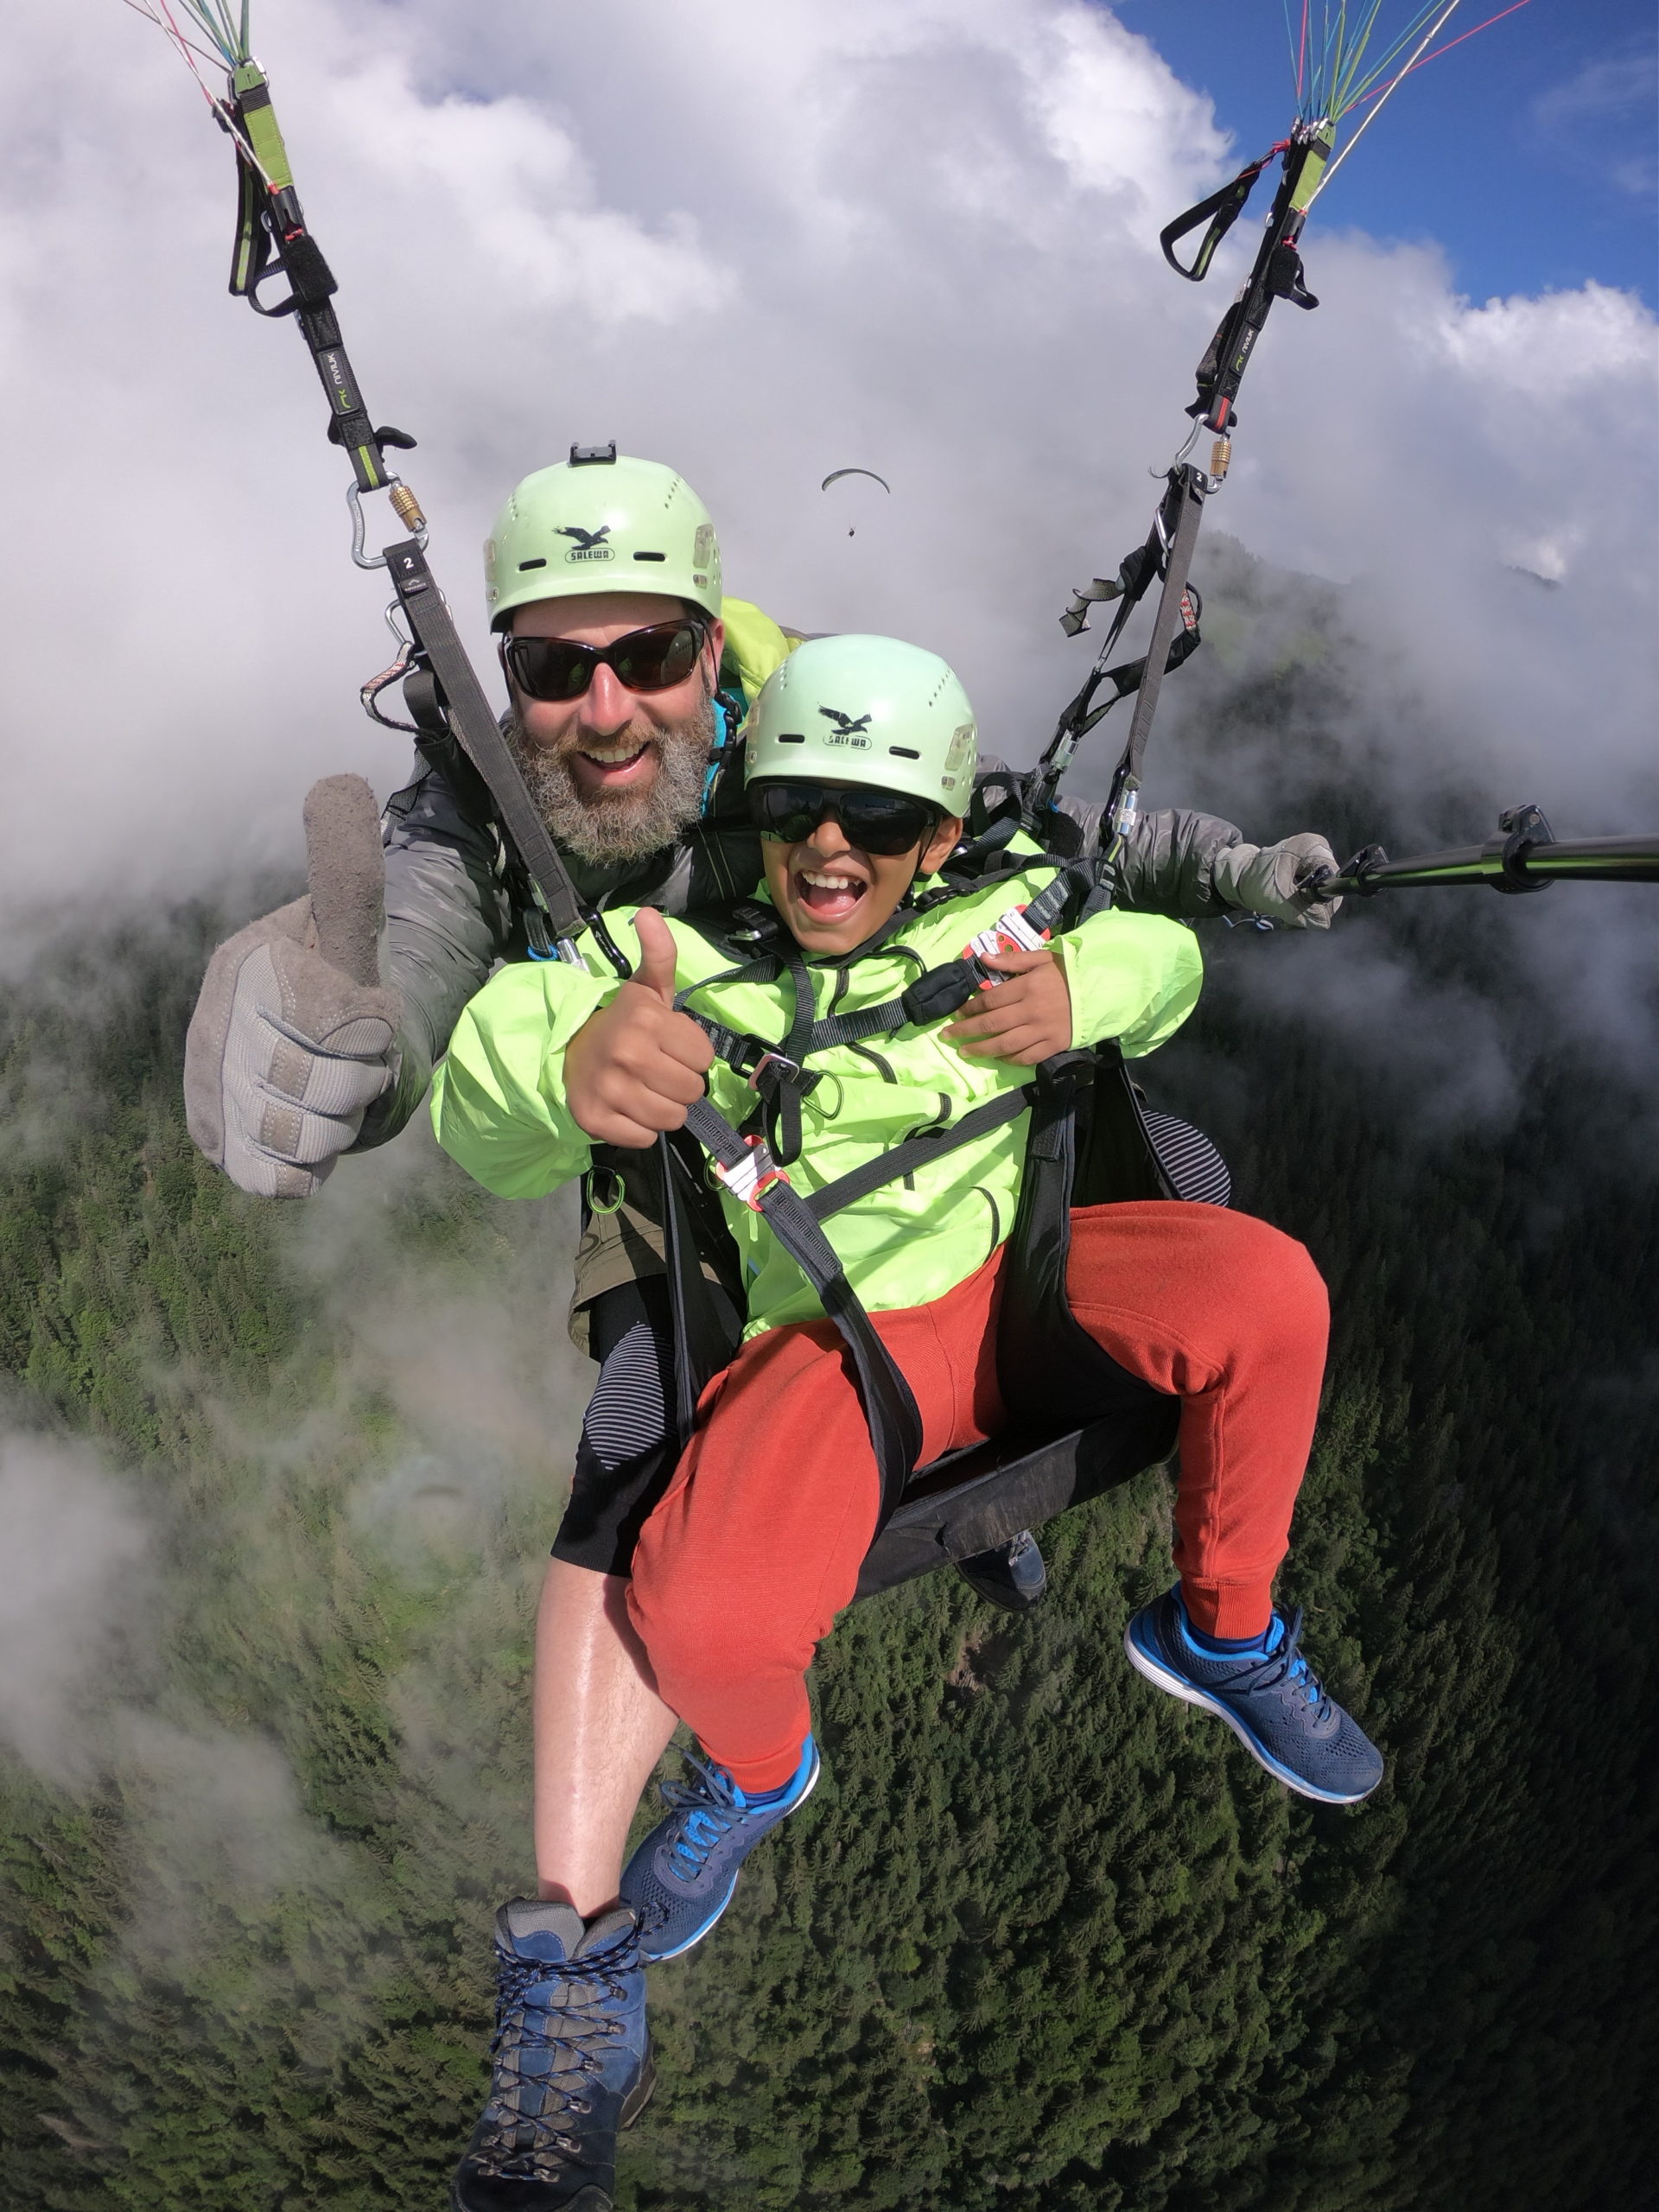 Paragliding with kids Interlaken big smiles thumbs up - Copy